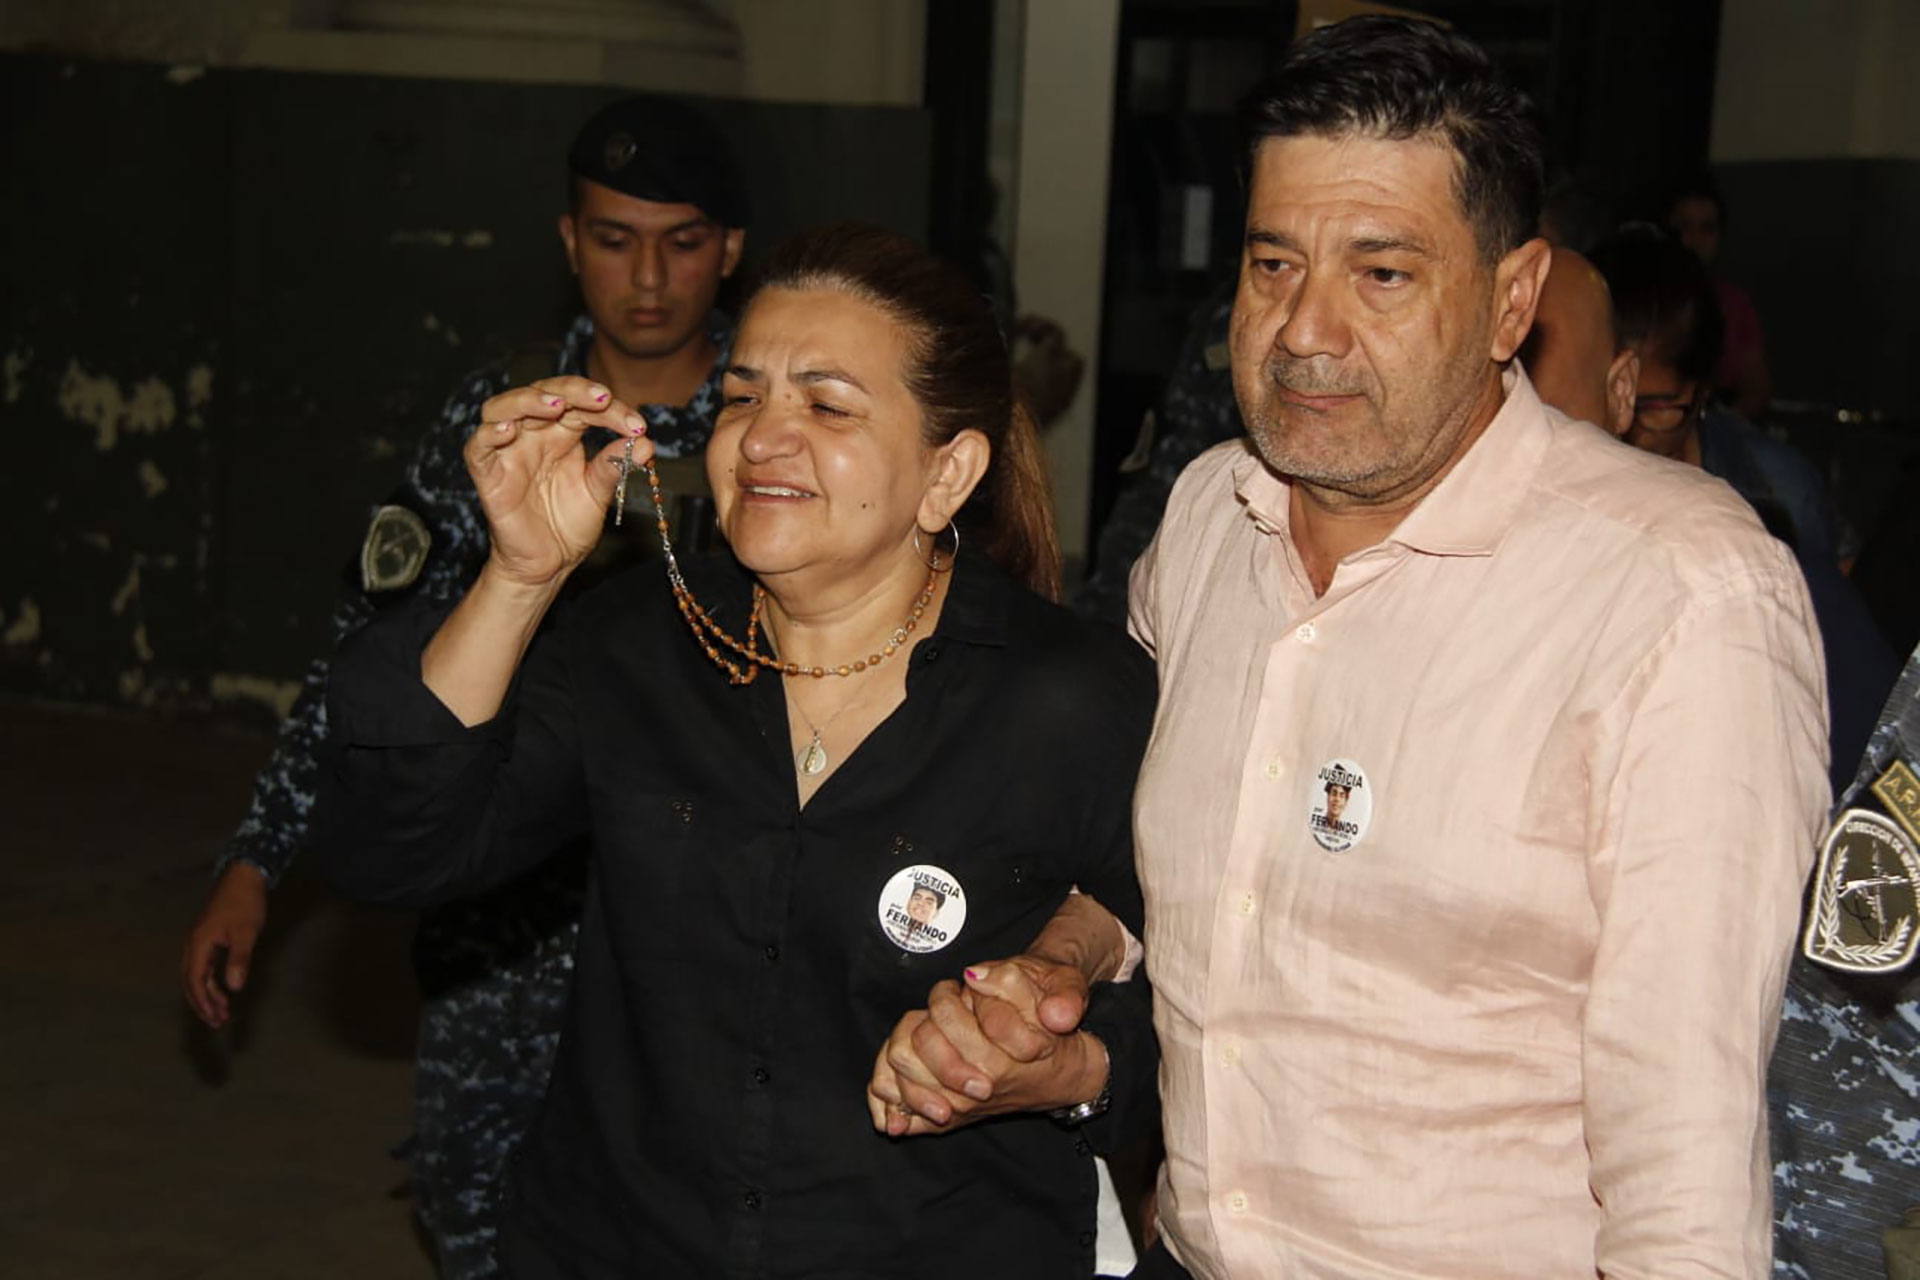 Graciela, the mother of Fernando Báez Sosa, spoke after the first day of allegations